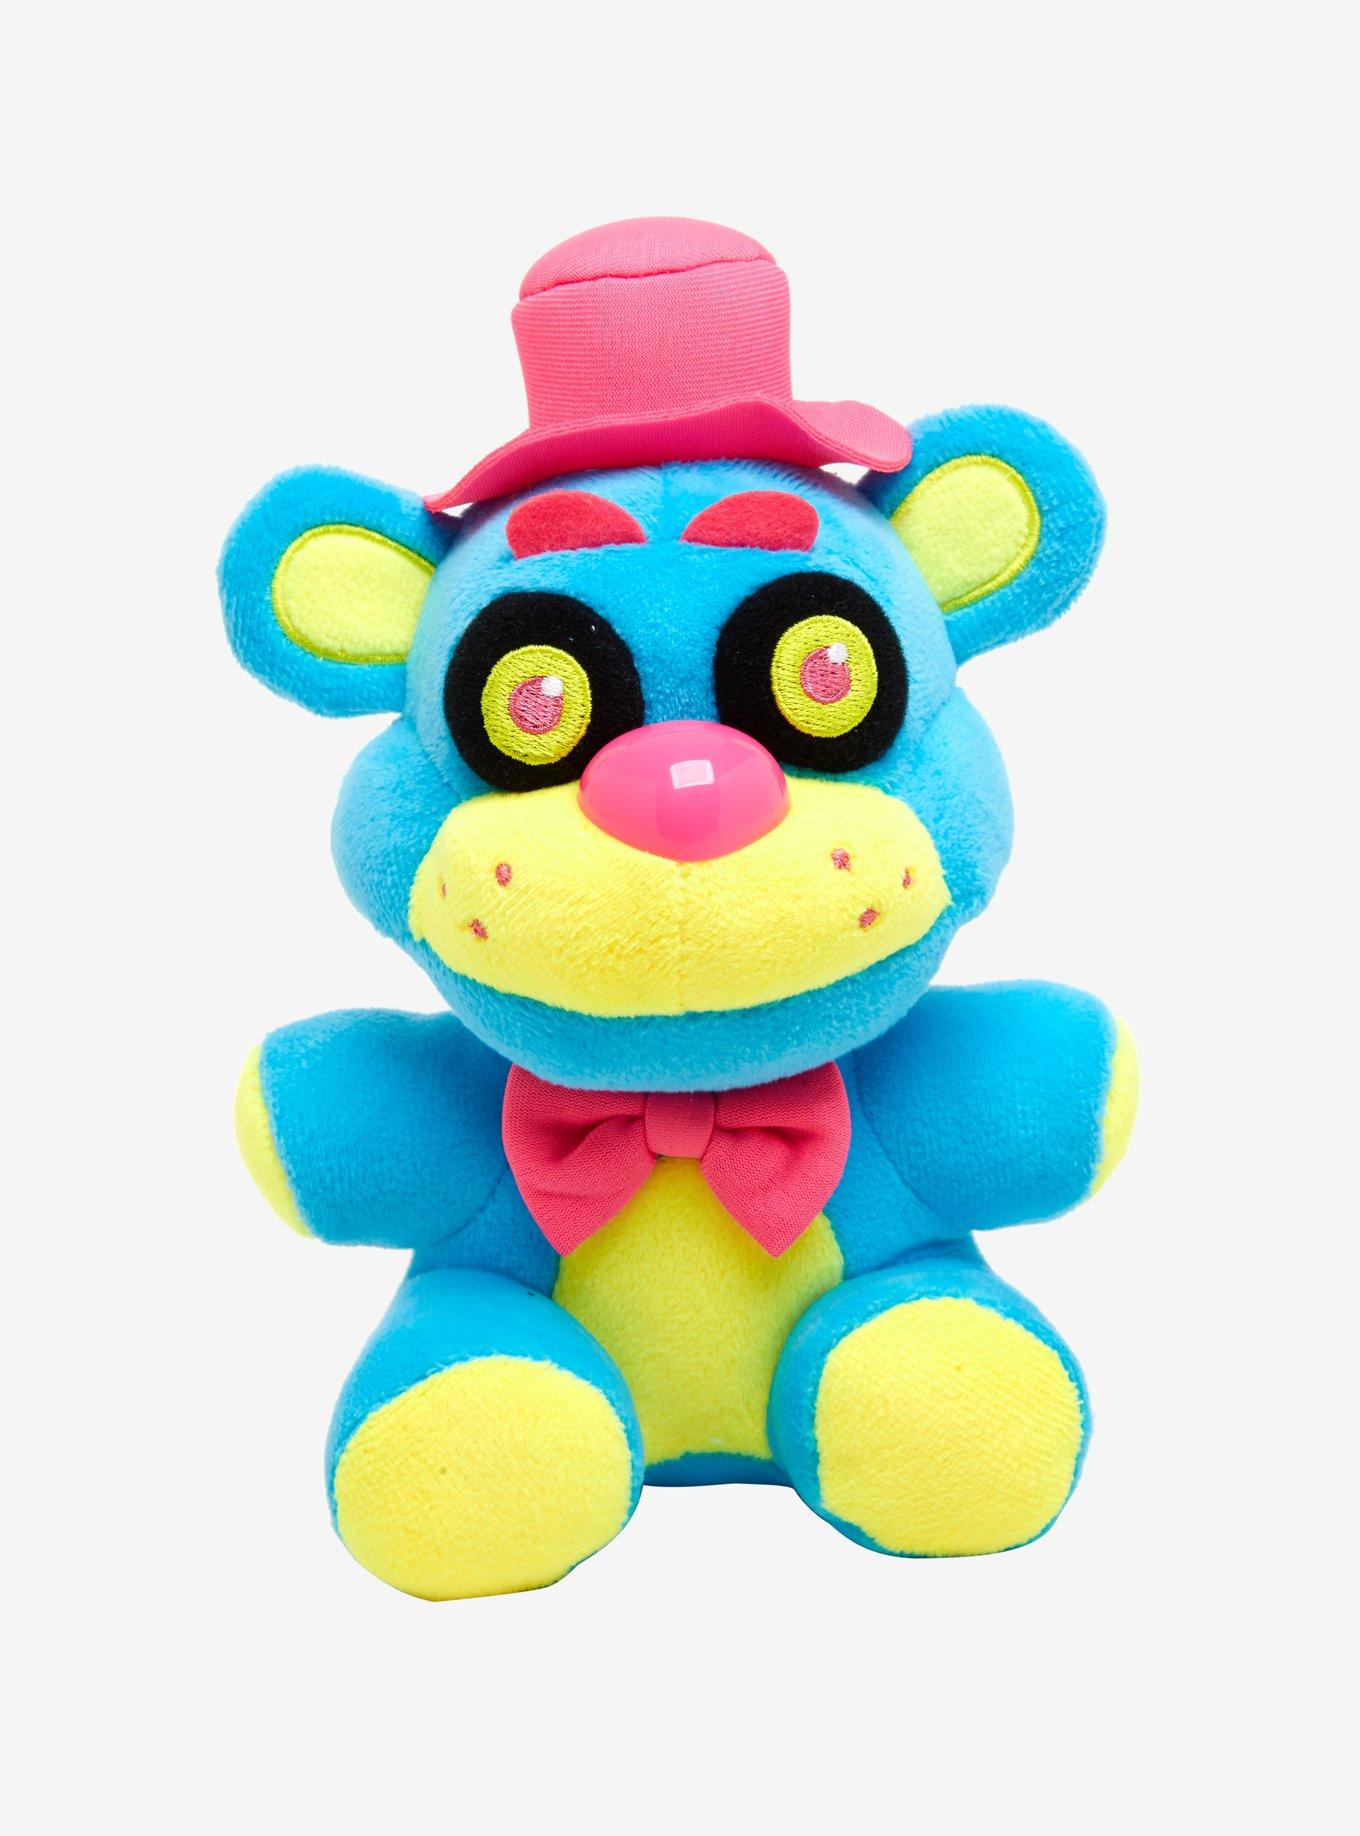 Official Funko Five Nights At Freddy's 6 Limited Edition Shadow Freddy  Bear (Hot Topic) Exclusive FNAF Plush Doll Toy